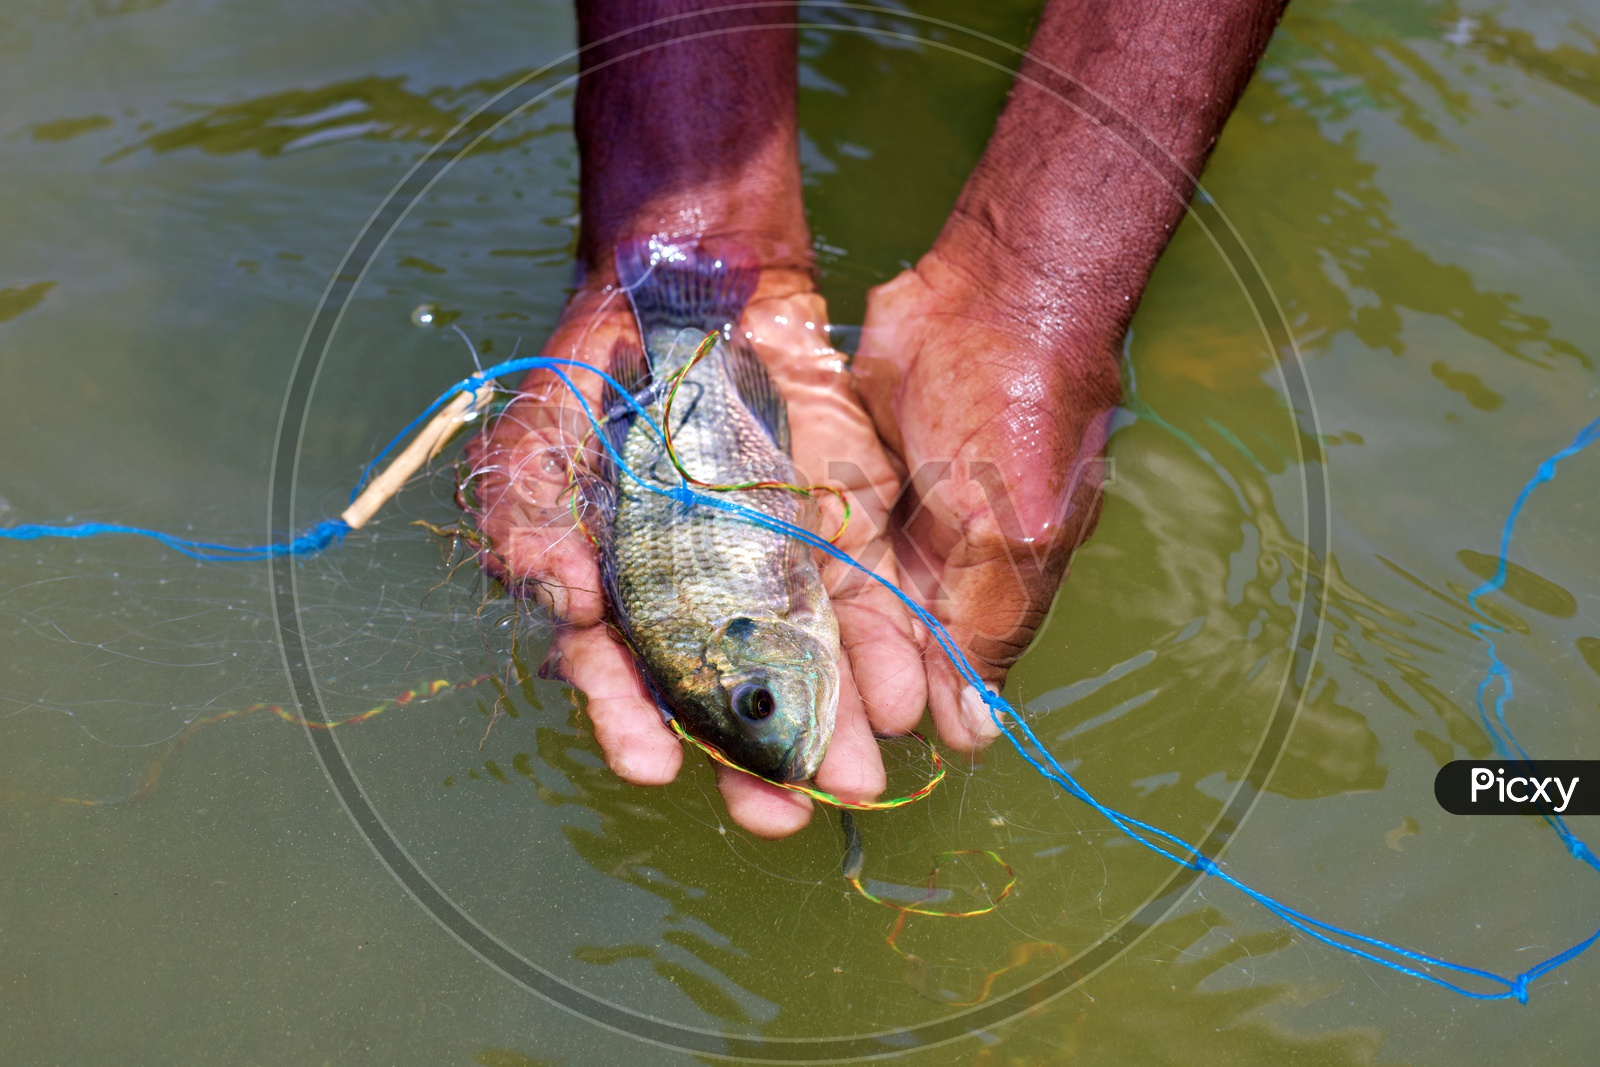 A fisher man showing  that a fish got stuck in his net.